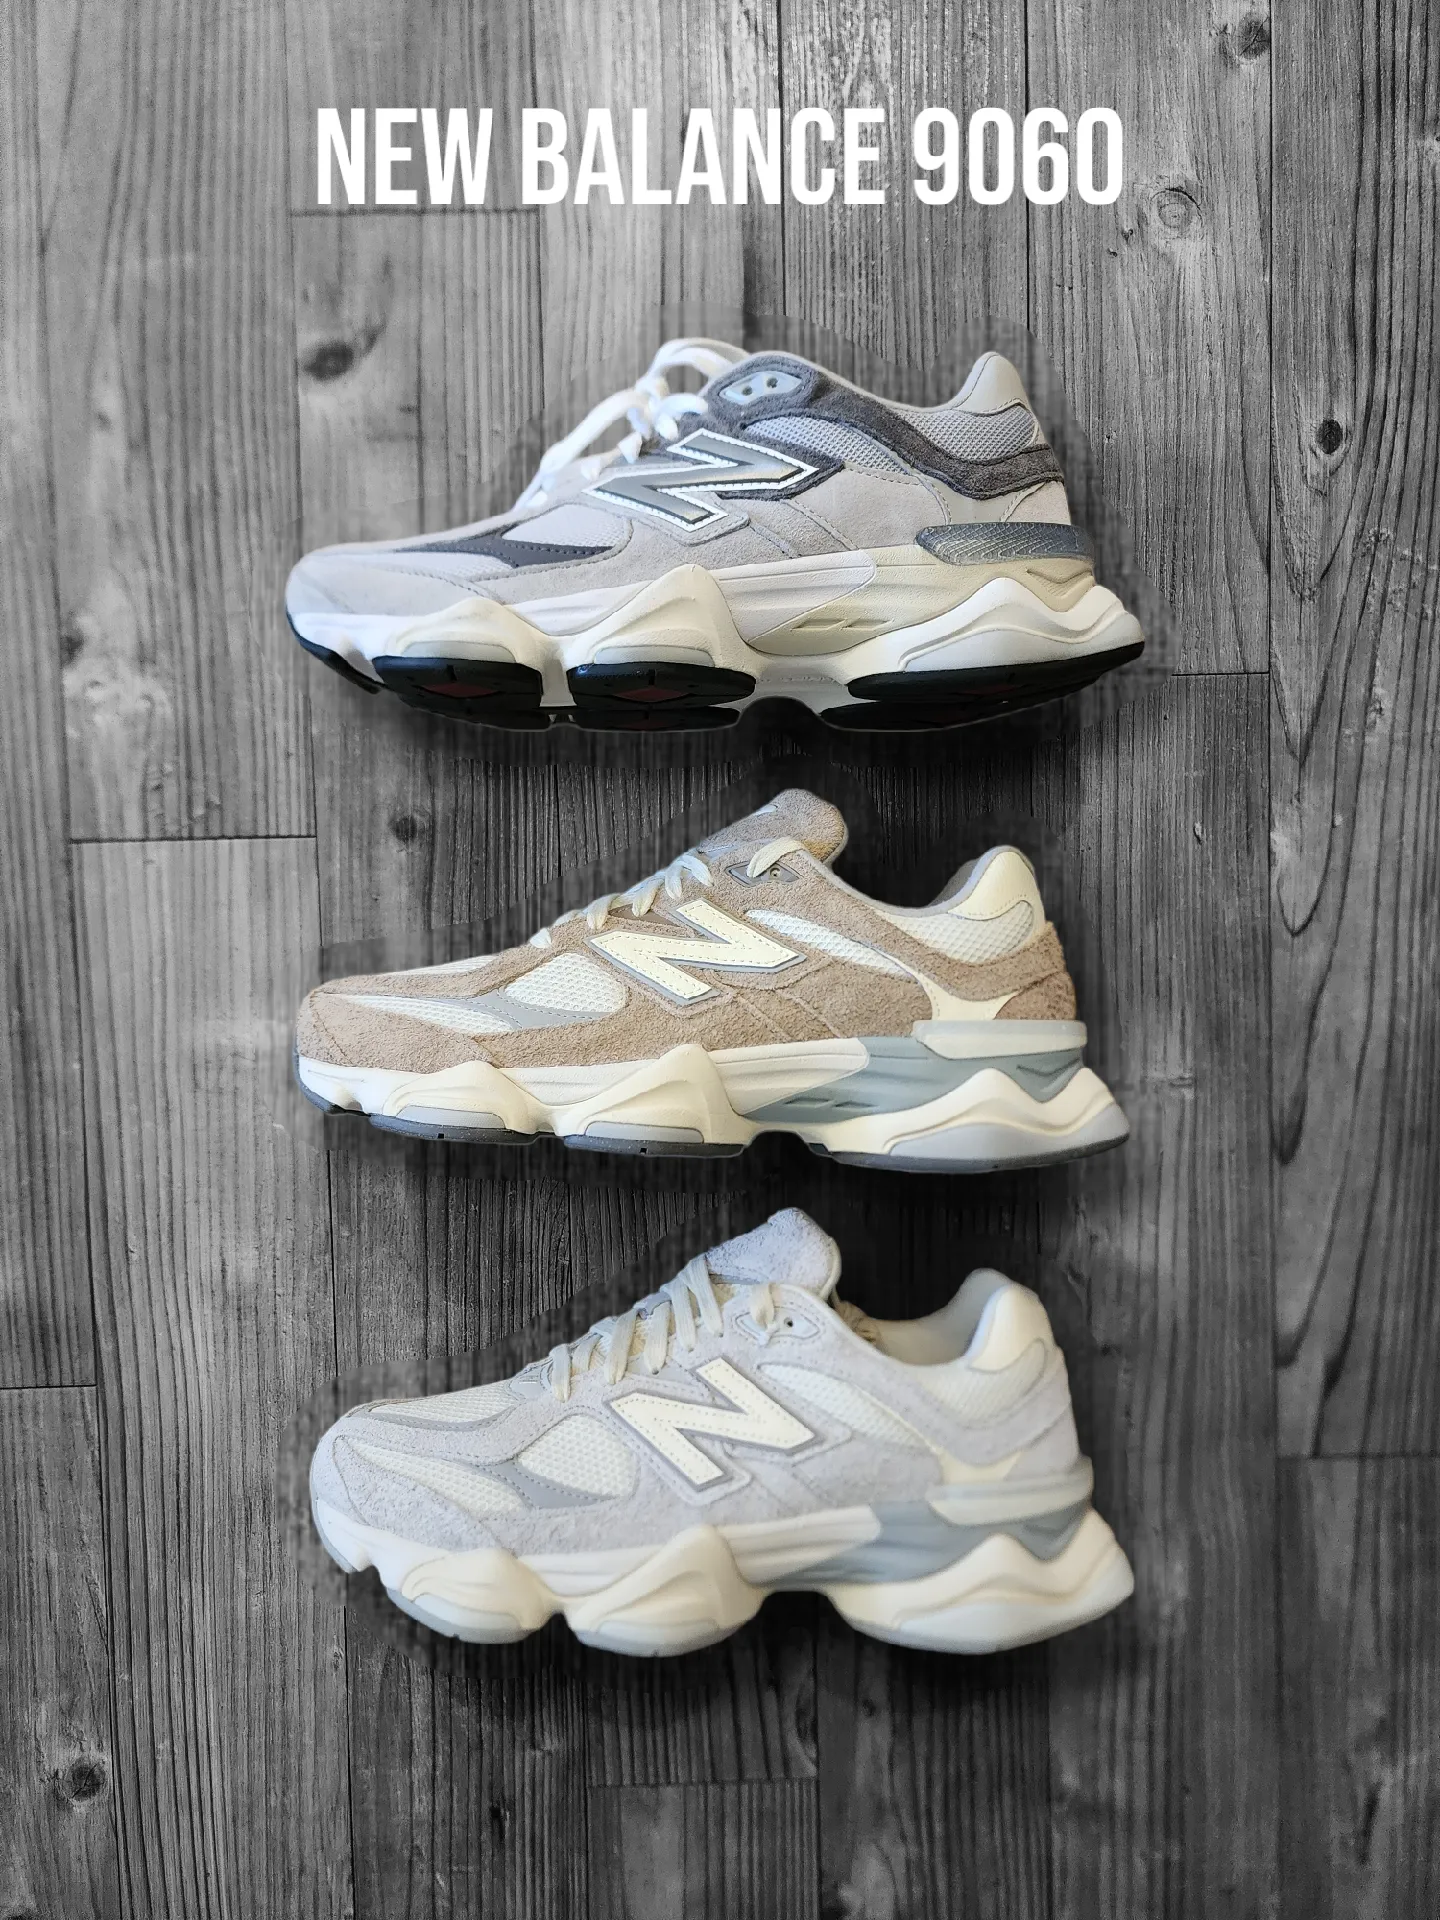 This summer's hottest sneaker? New Balance 9060s | harrisonが投稿 ...